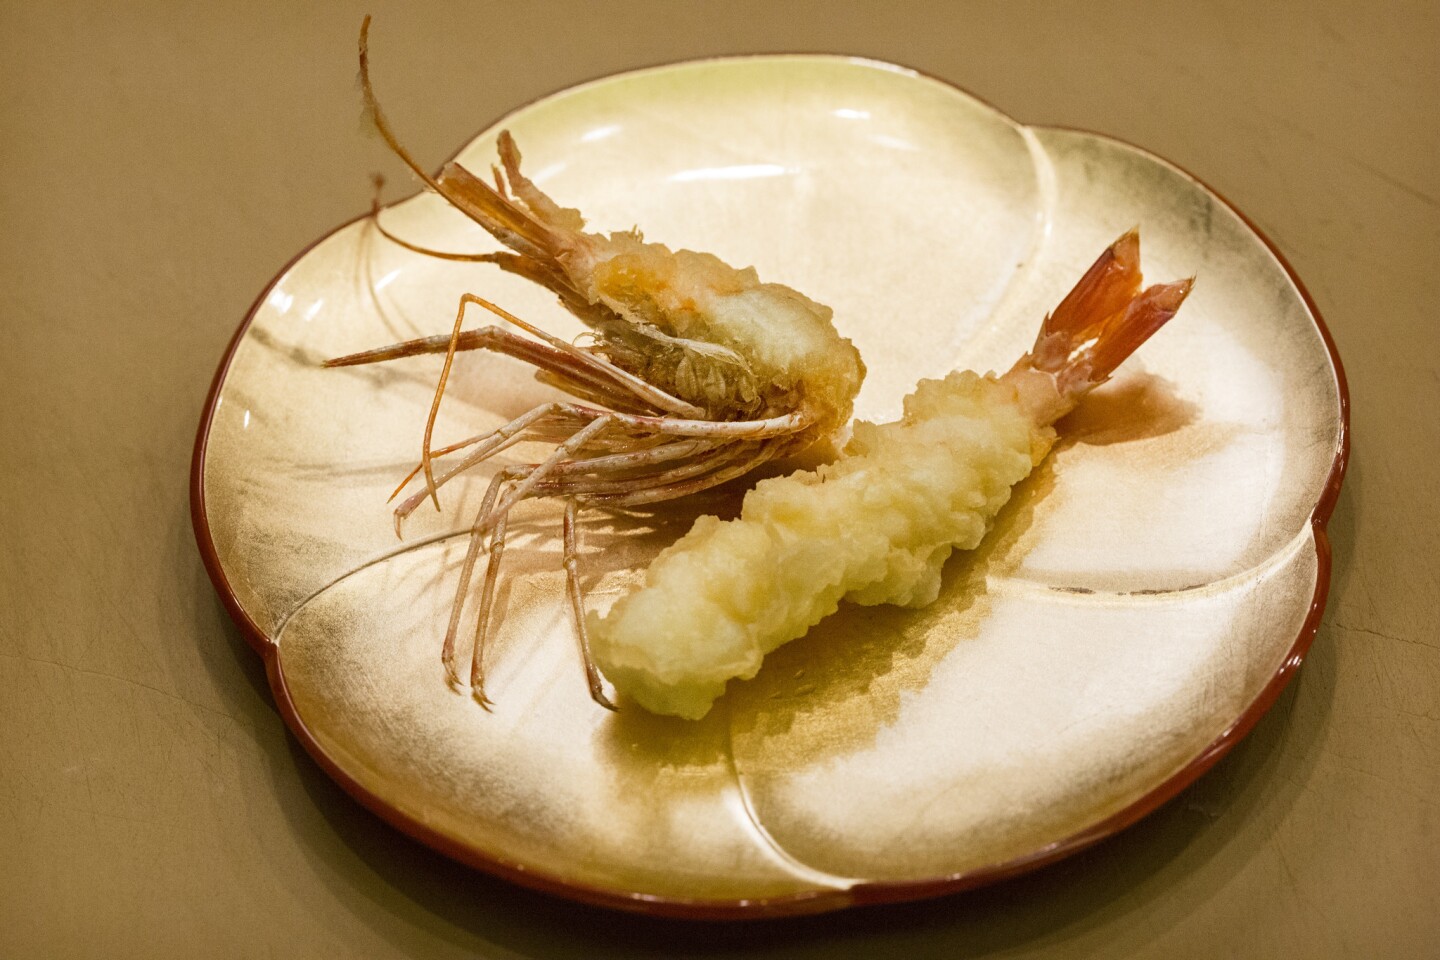 Prawn as served at Tempura Endo in Beverly Hills. The restaurant cooks tempura-style, specializing in the art of omakase.